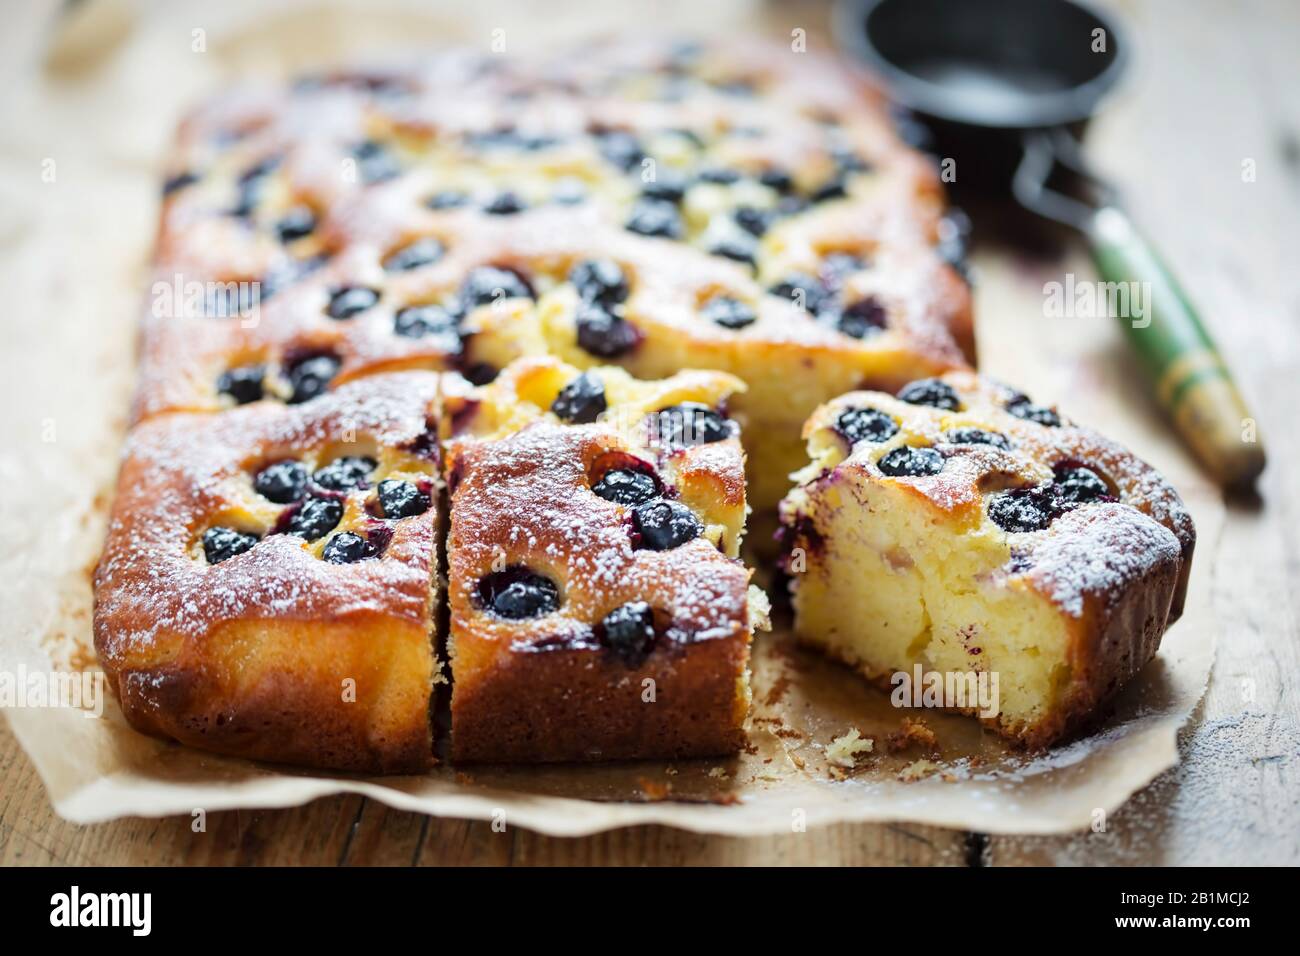 Lime juice, yoghurt, olive oil cake with blueberries Stock Photo